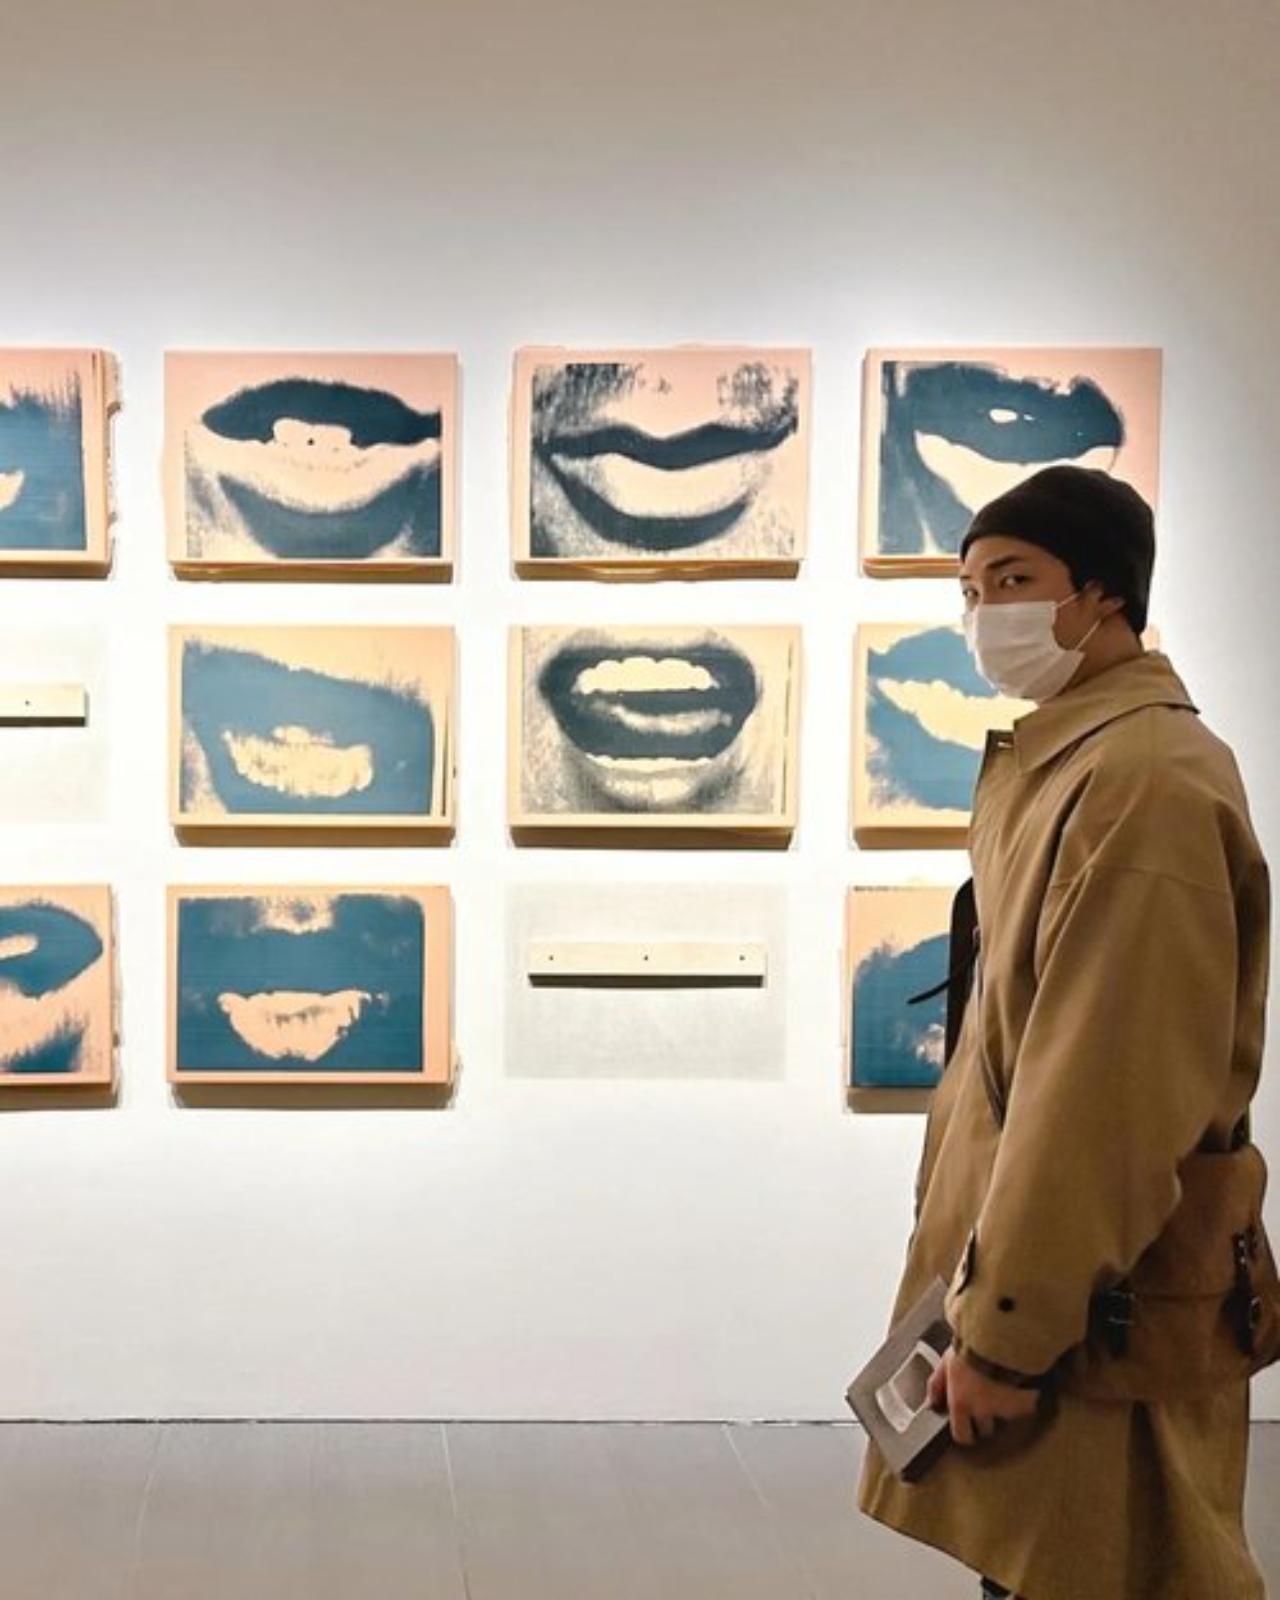 Namjoon often posts pictures of his outings to art museums and galleries across the globe on his social media accounts. His outfits definitely match the vibe of a 'dark academia' aesthetic perfectly